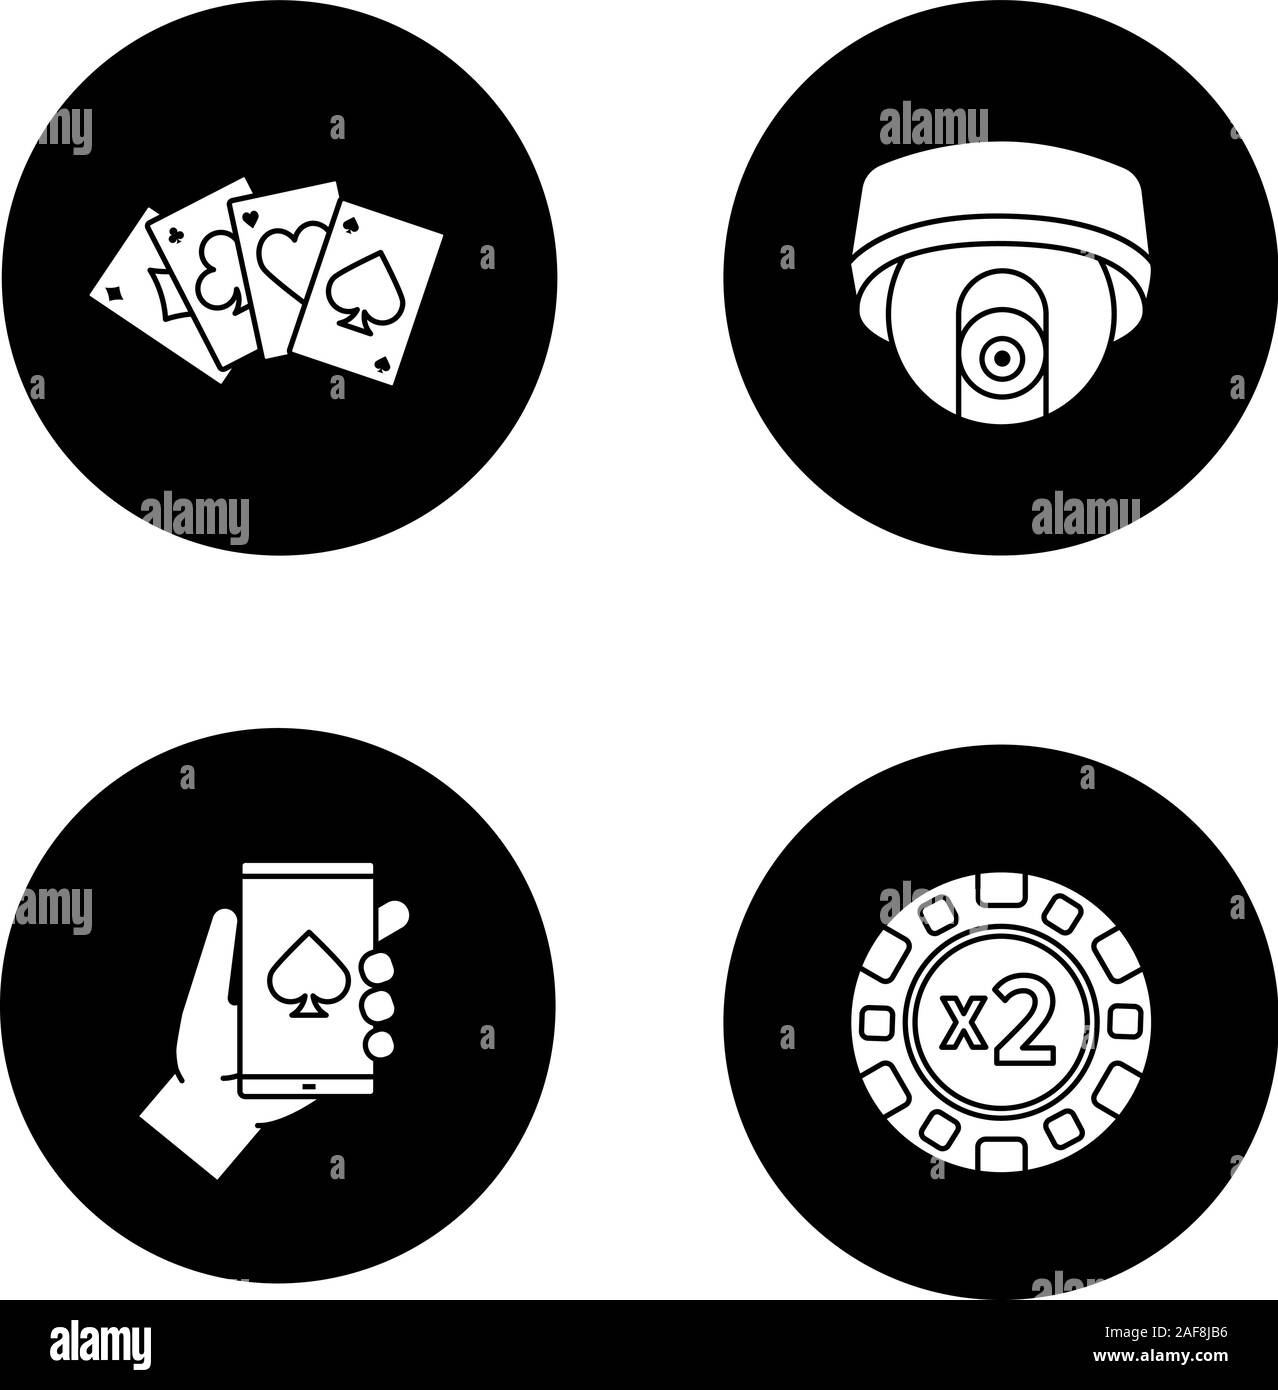 Casino glyph icons set. Doubledown chip, four aces, surveillance camera, online casino. Vector white silhouettes illustrations in black circles Stock Vector